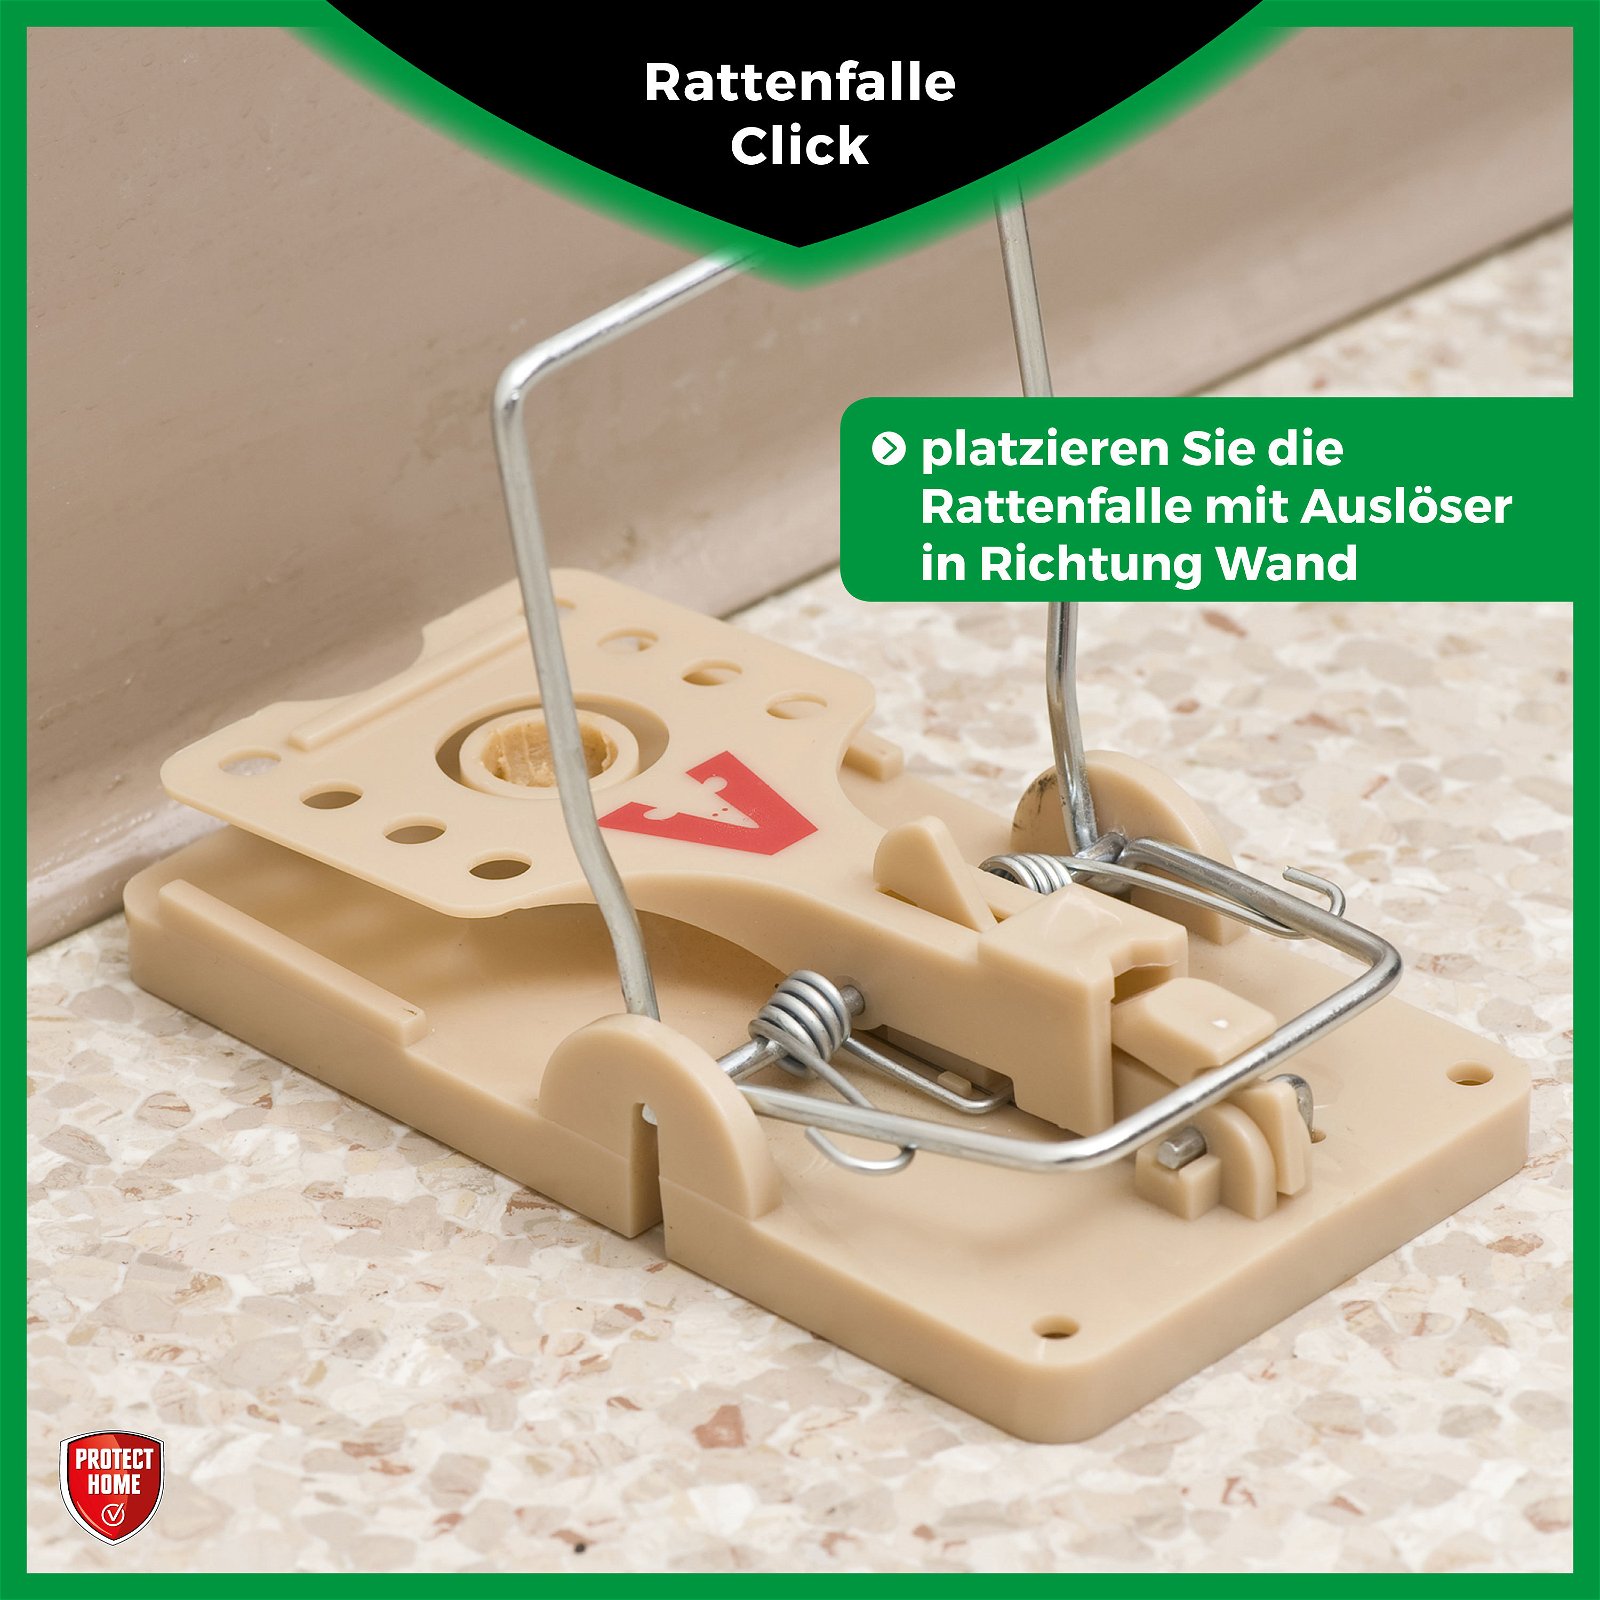 Rattenfalle Click, Protect Home, 2 Stück